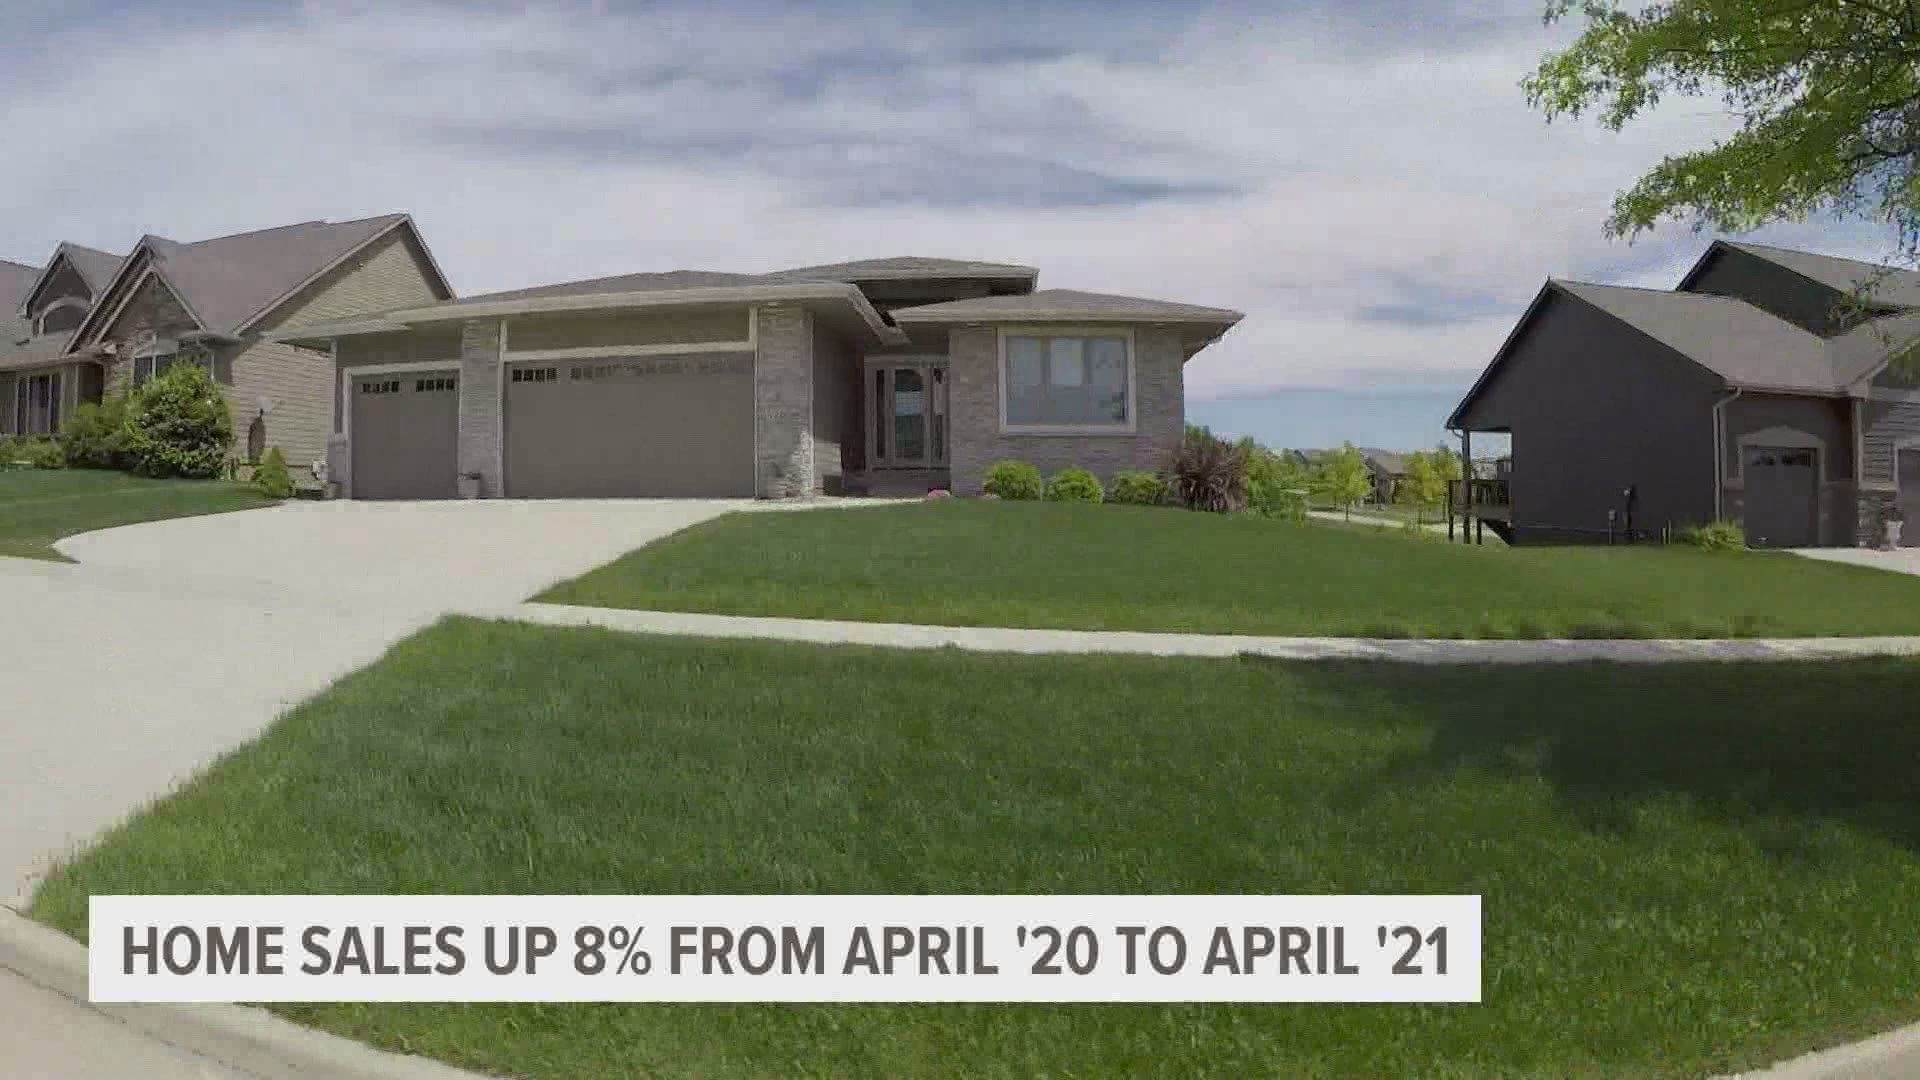 The Iowa Association of Realtors says the growth in sales is likely to continue.